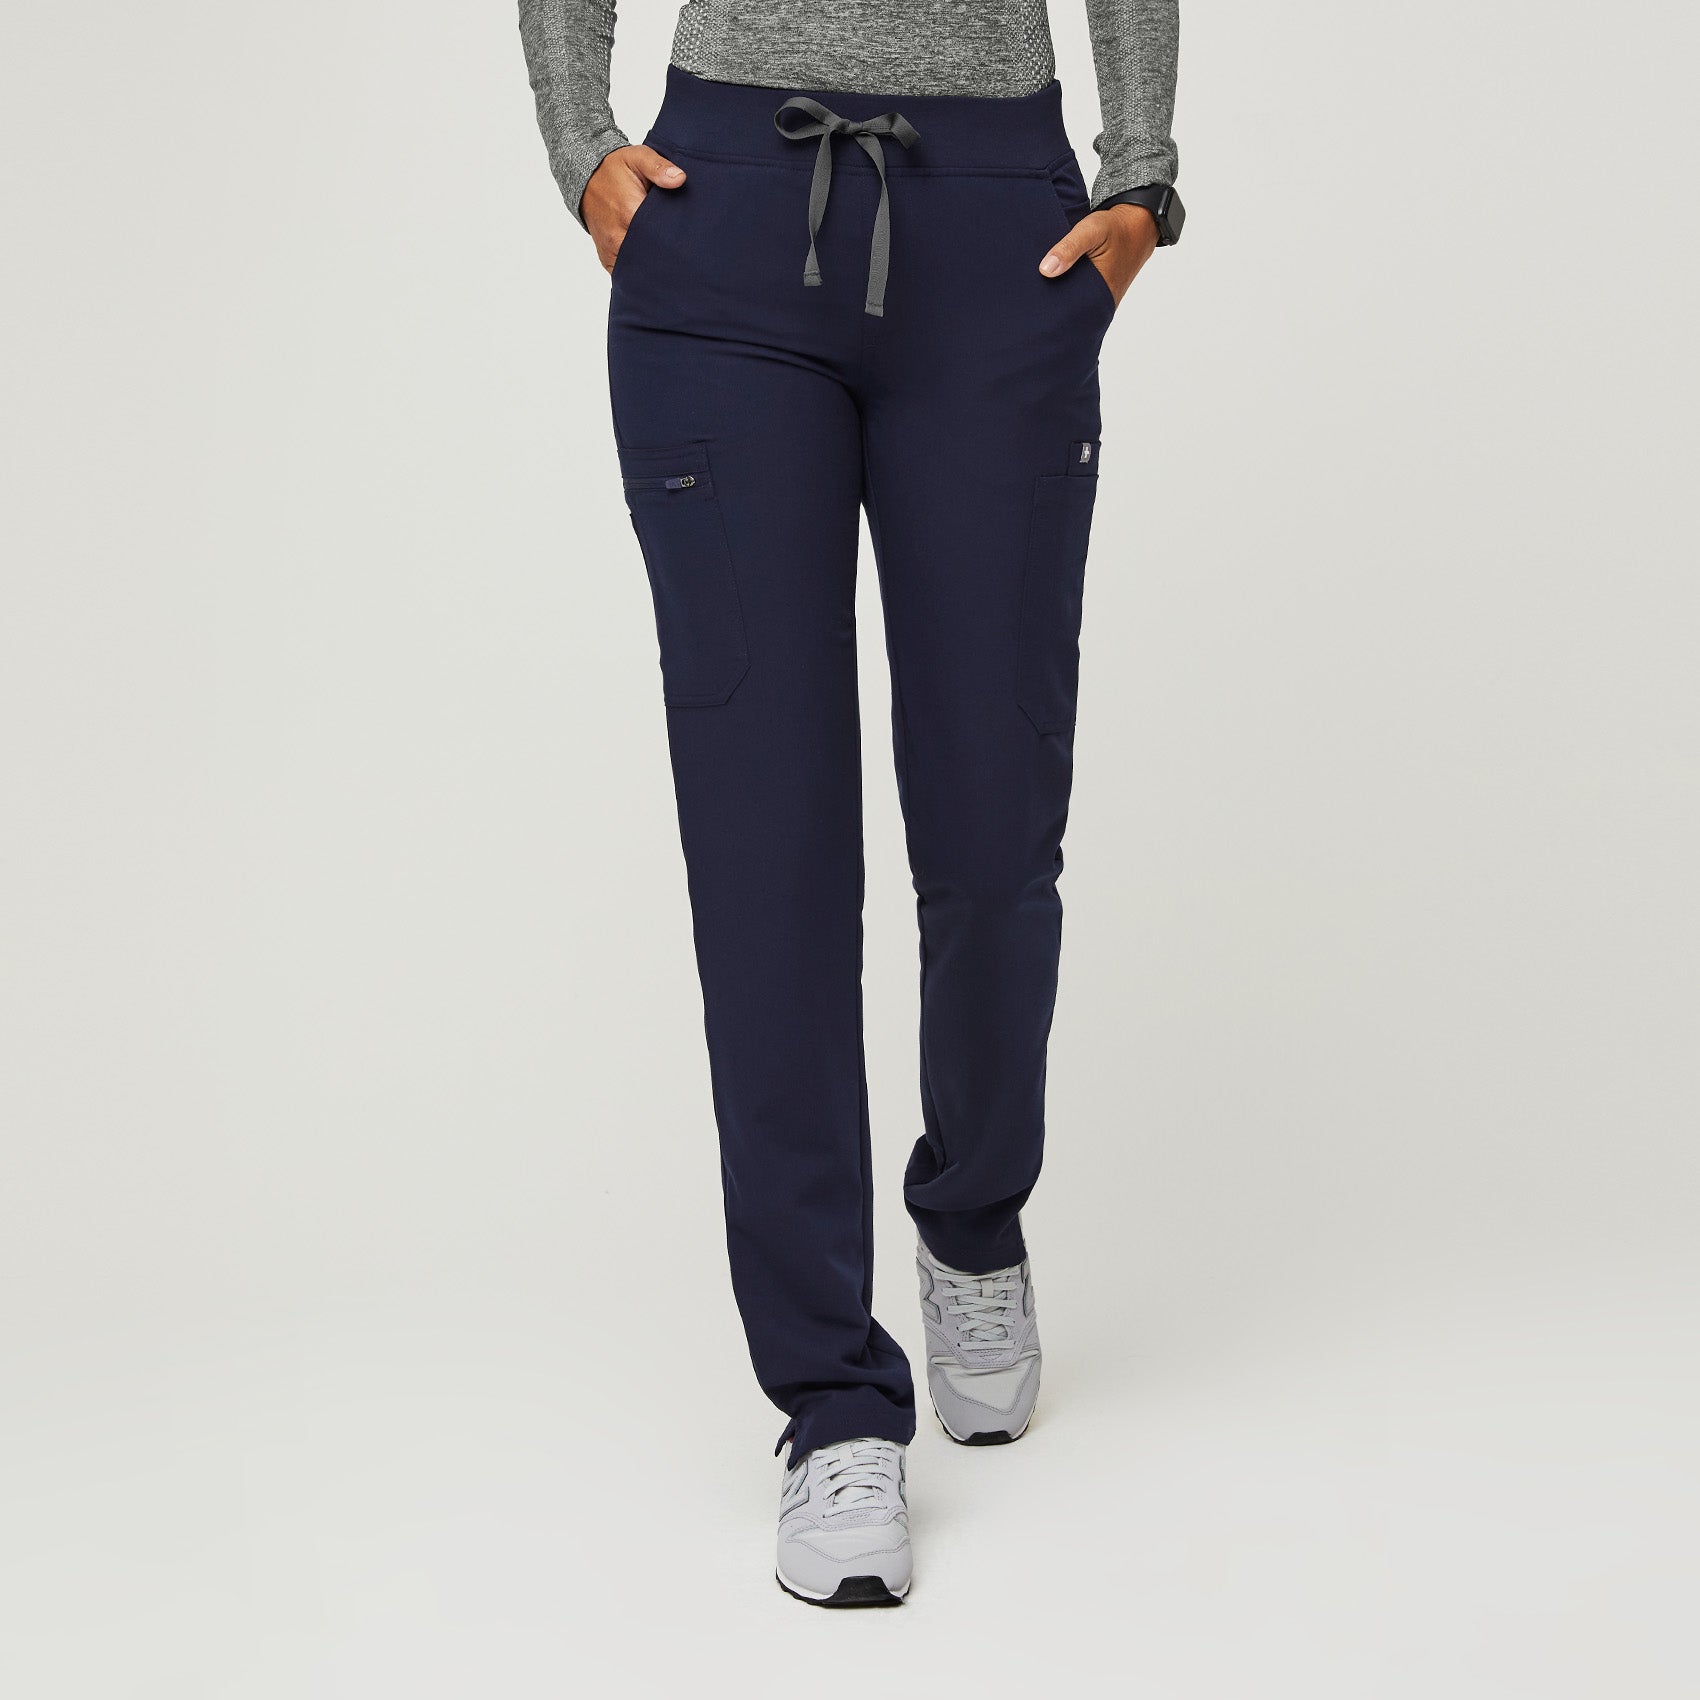 sold out FIG Clothing Yola 2.0 Maternity Scrub Pants in Navy ...